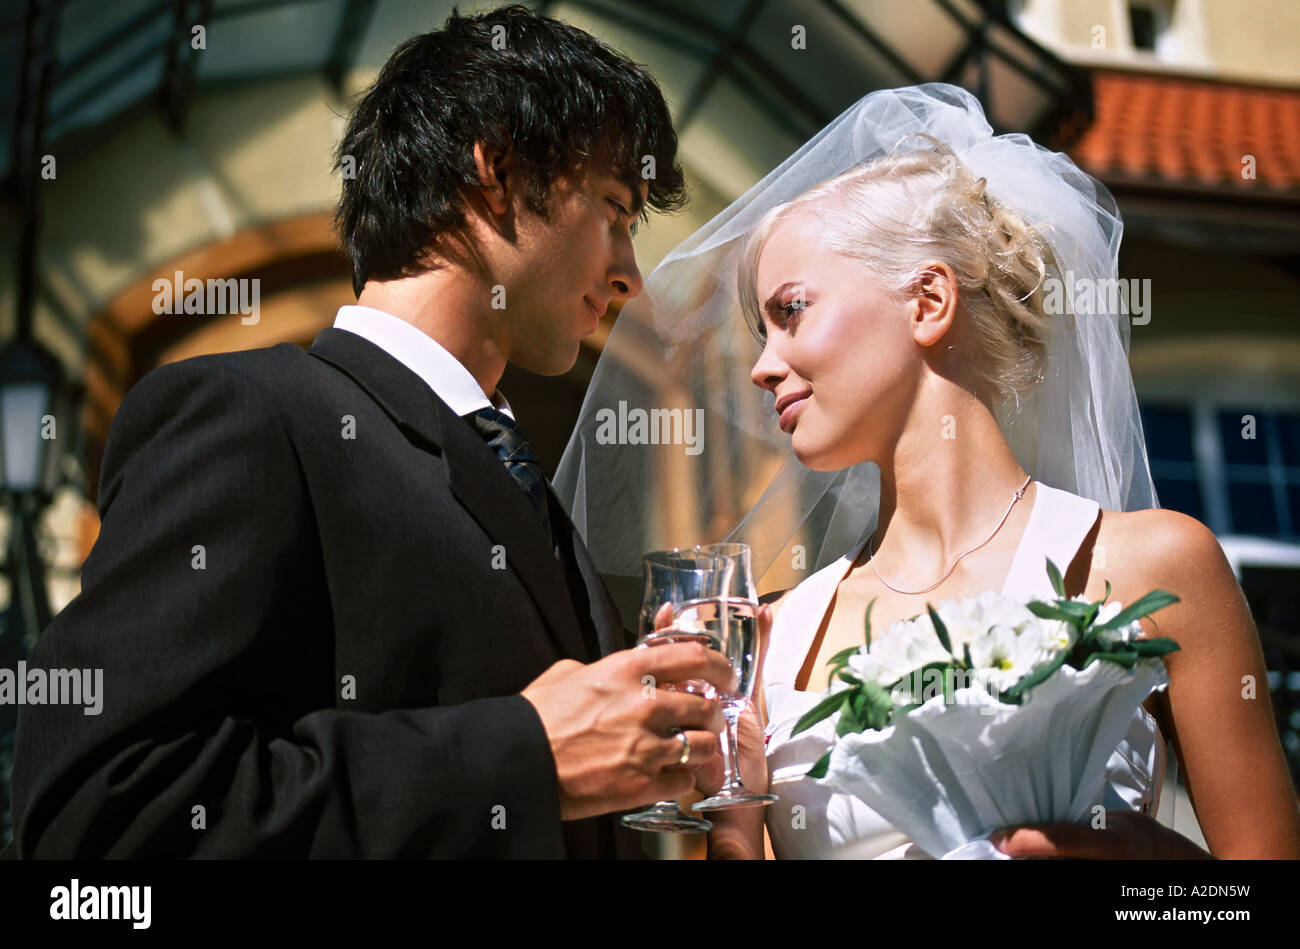 1207918 outdoor day summer church stairs couple marriage wedding newlyweds man woman young 25 30 blonde dark haired dress wed Stock Photo